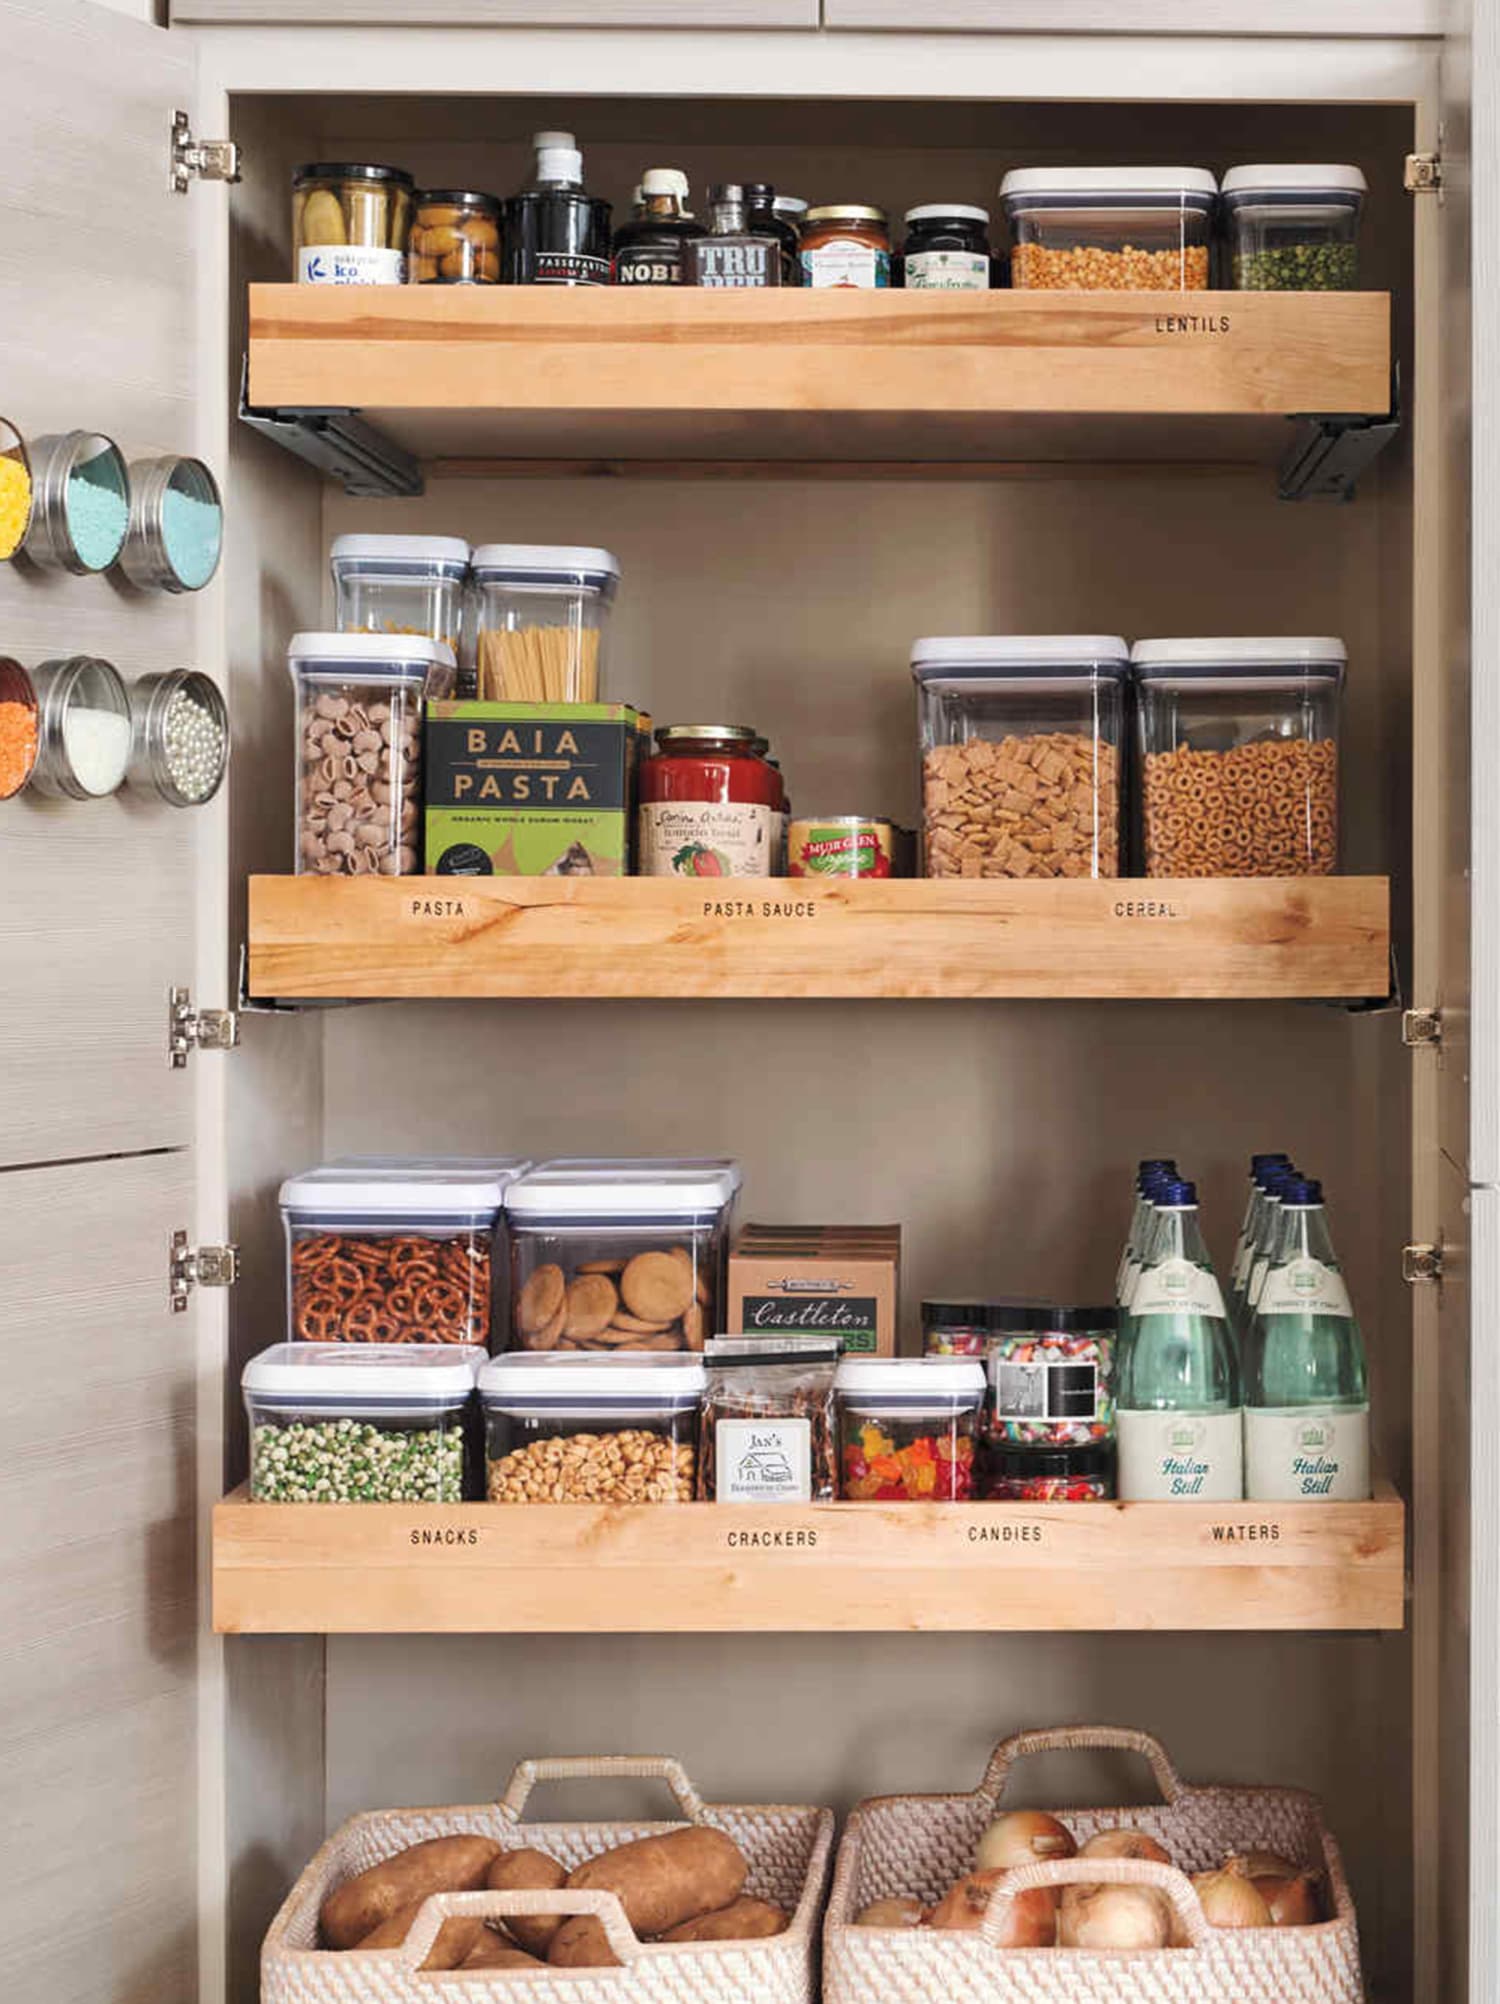 5 Benefits of An Organized Cupboard – With Simple Tips! – Kitchen Stuff Plus